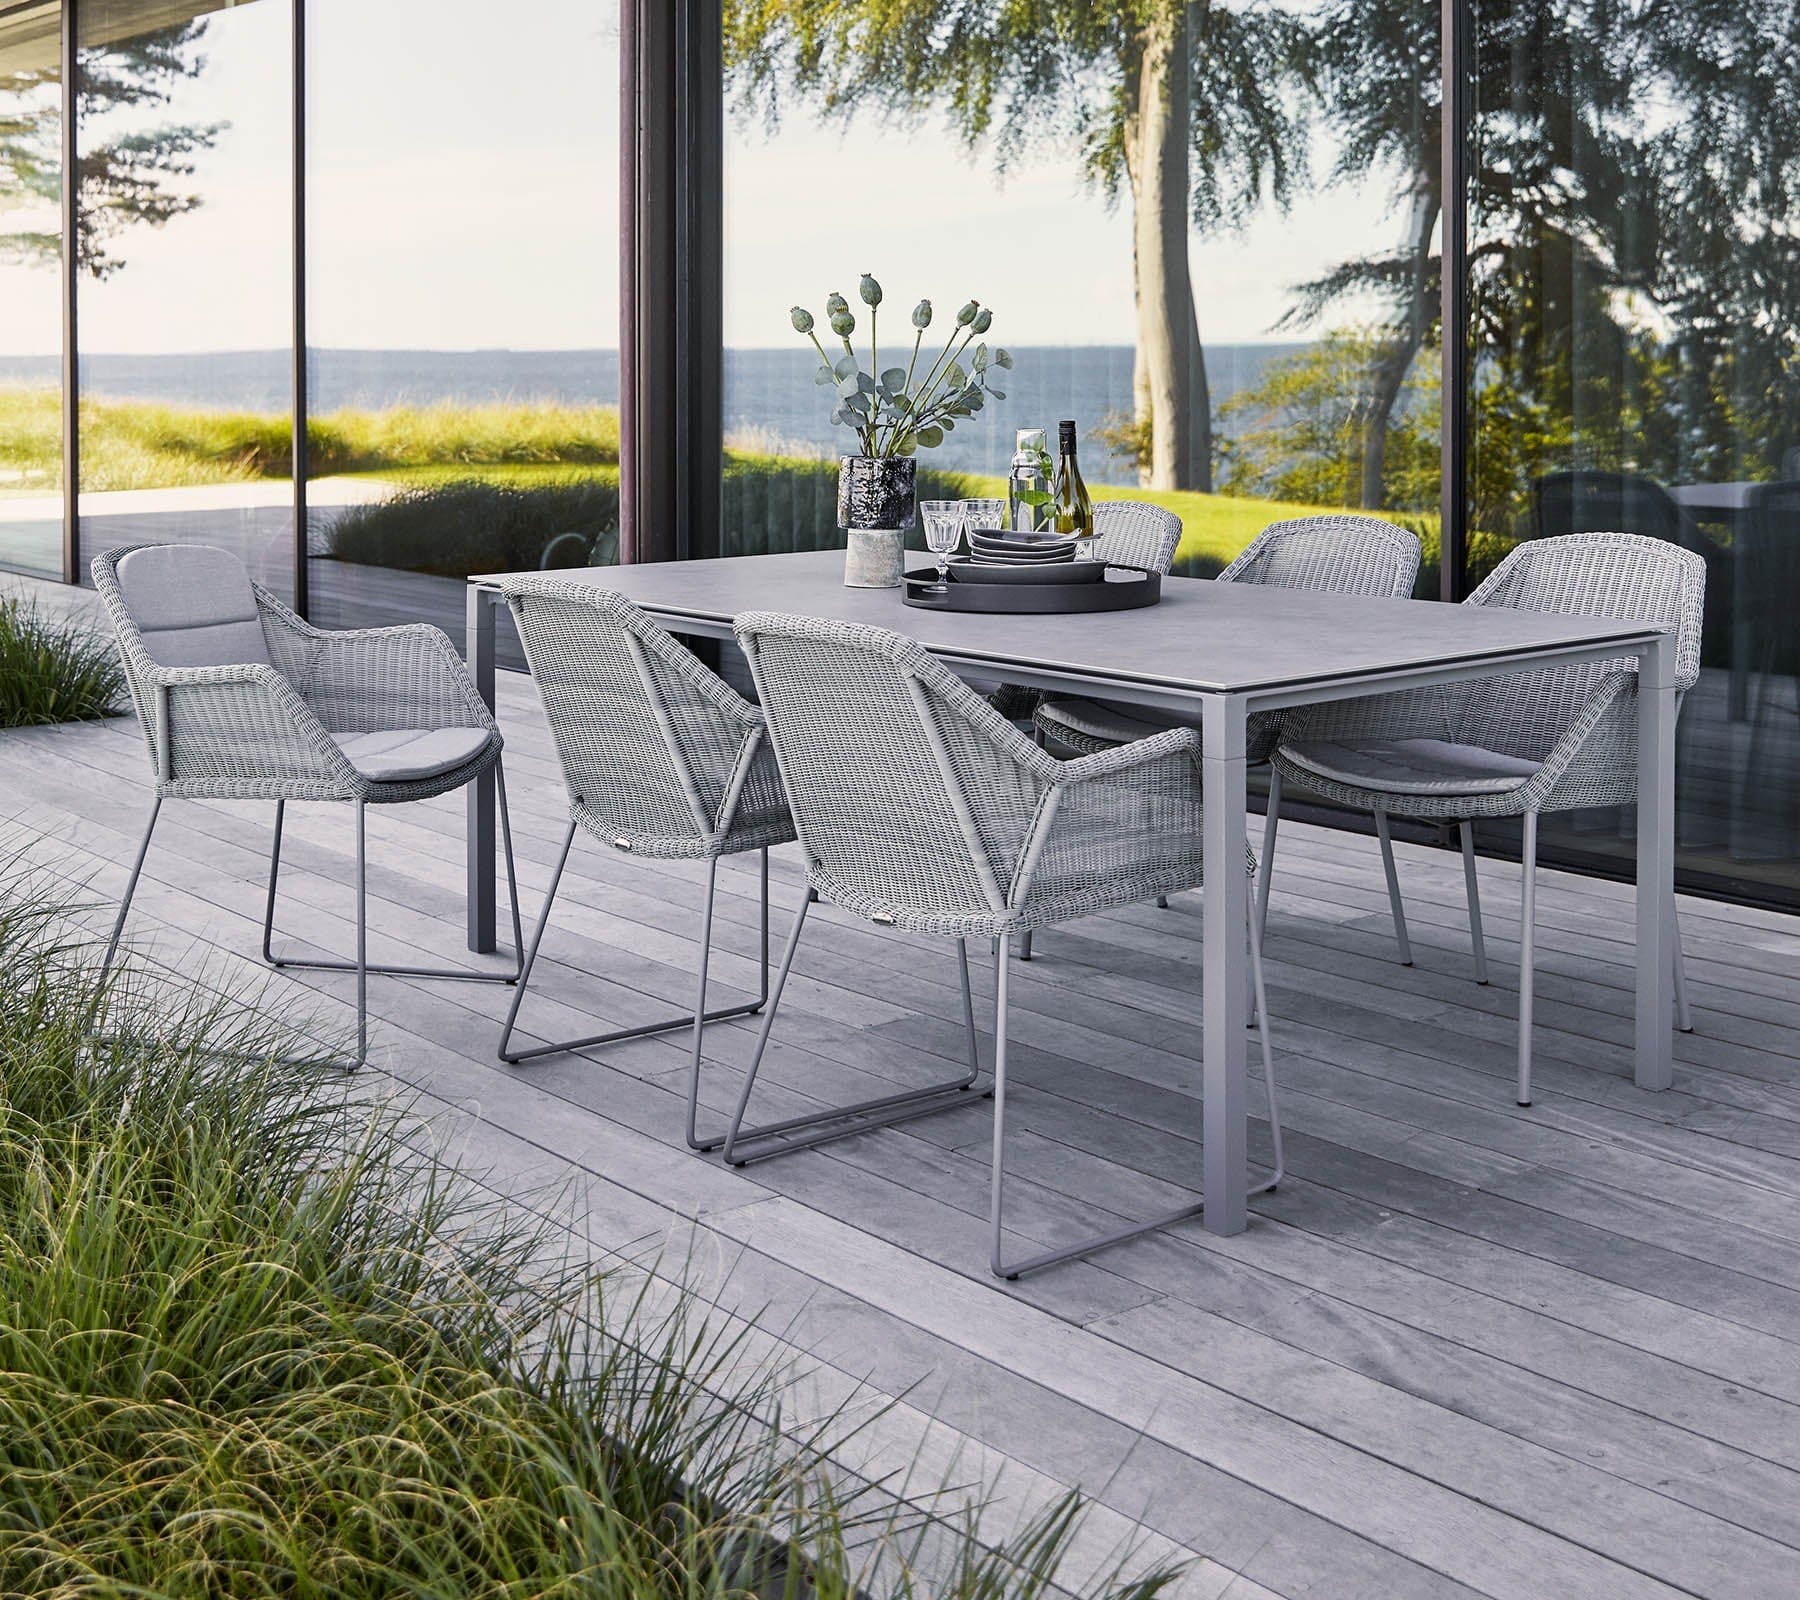 Boxhill's Breeze Dining Weave Chair Light Grey lifestyle image with dining table on wooden platform beside glass wall